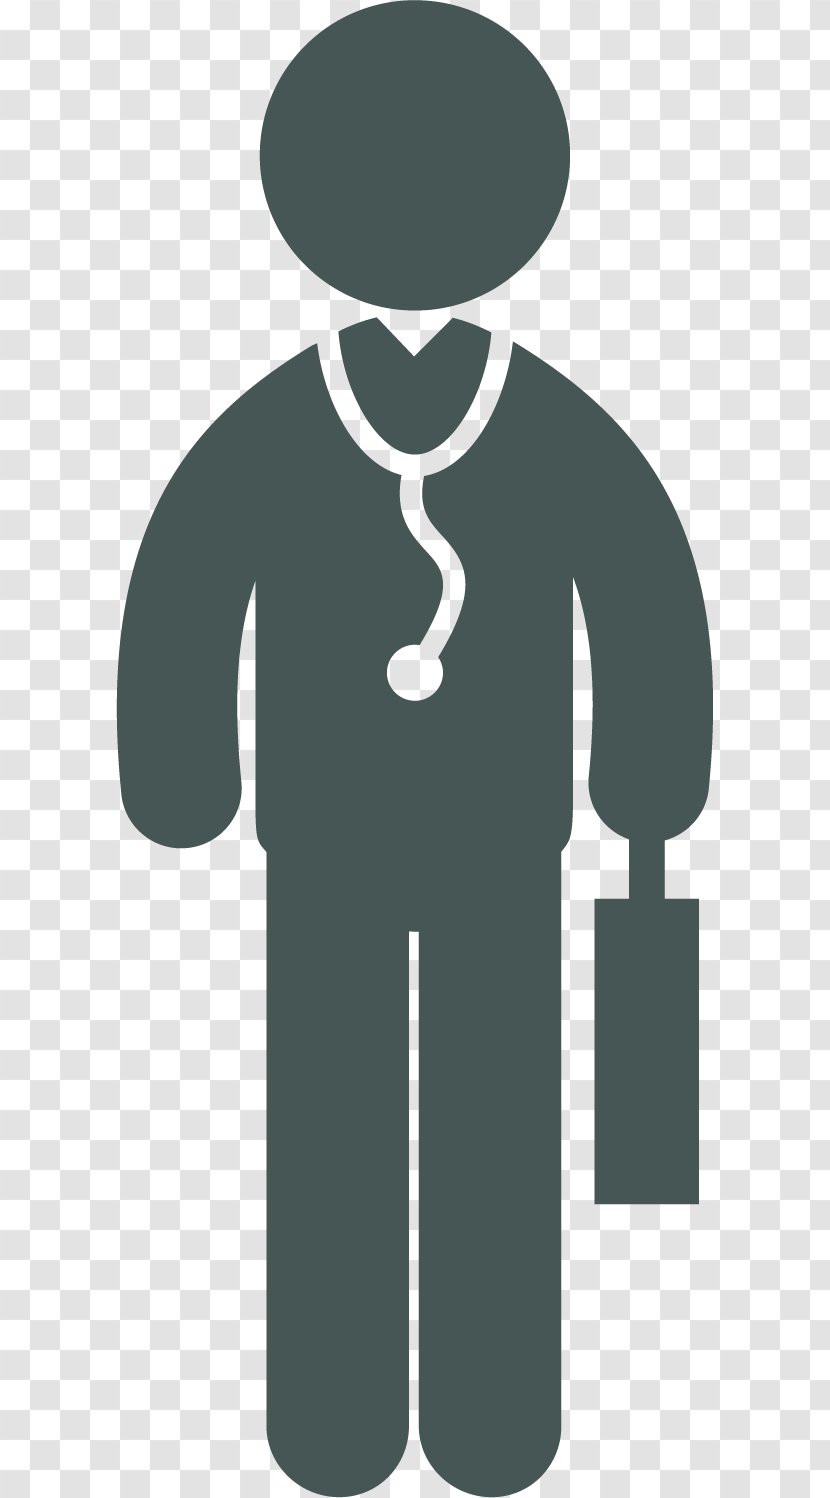 Physician Medicine Health Care Icon - Doctors Travel To See A Doctor Cartoon Transparent PNG